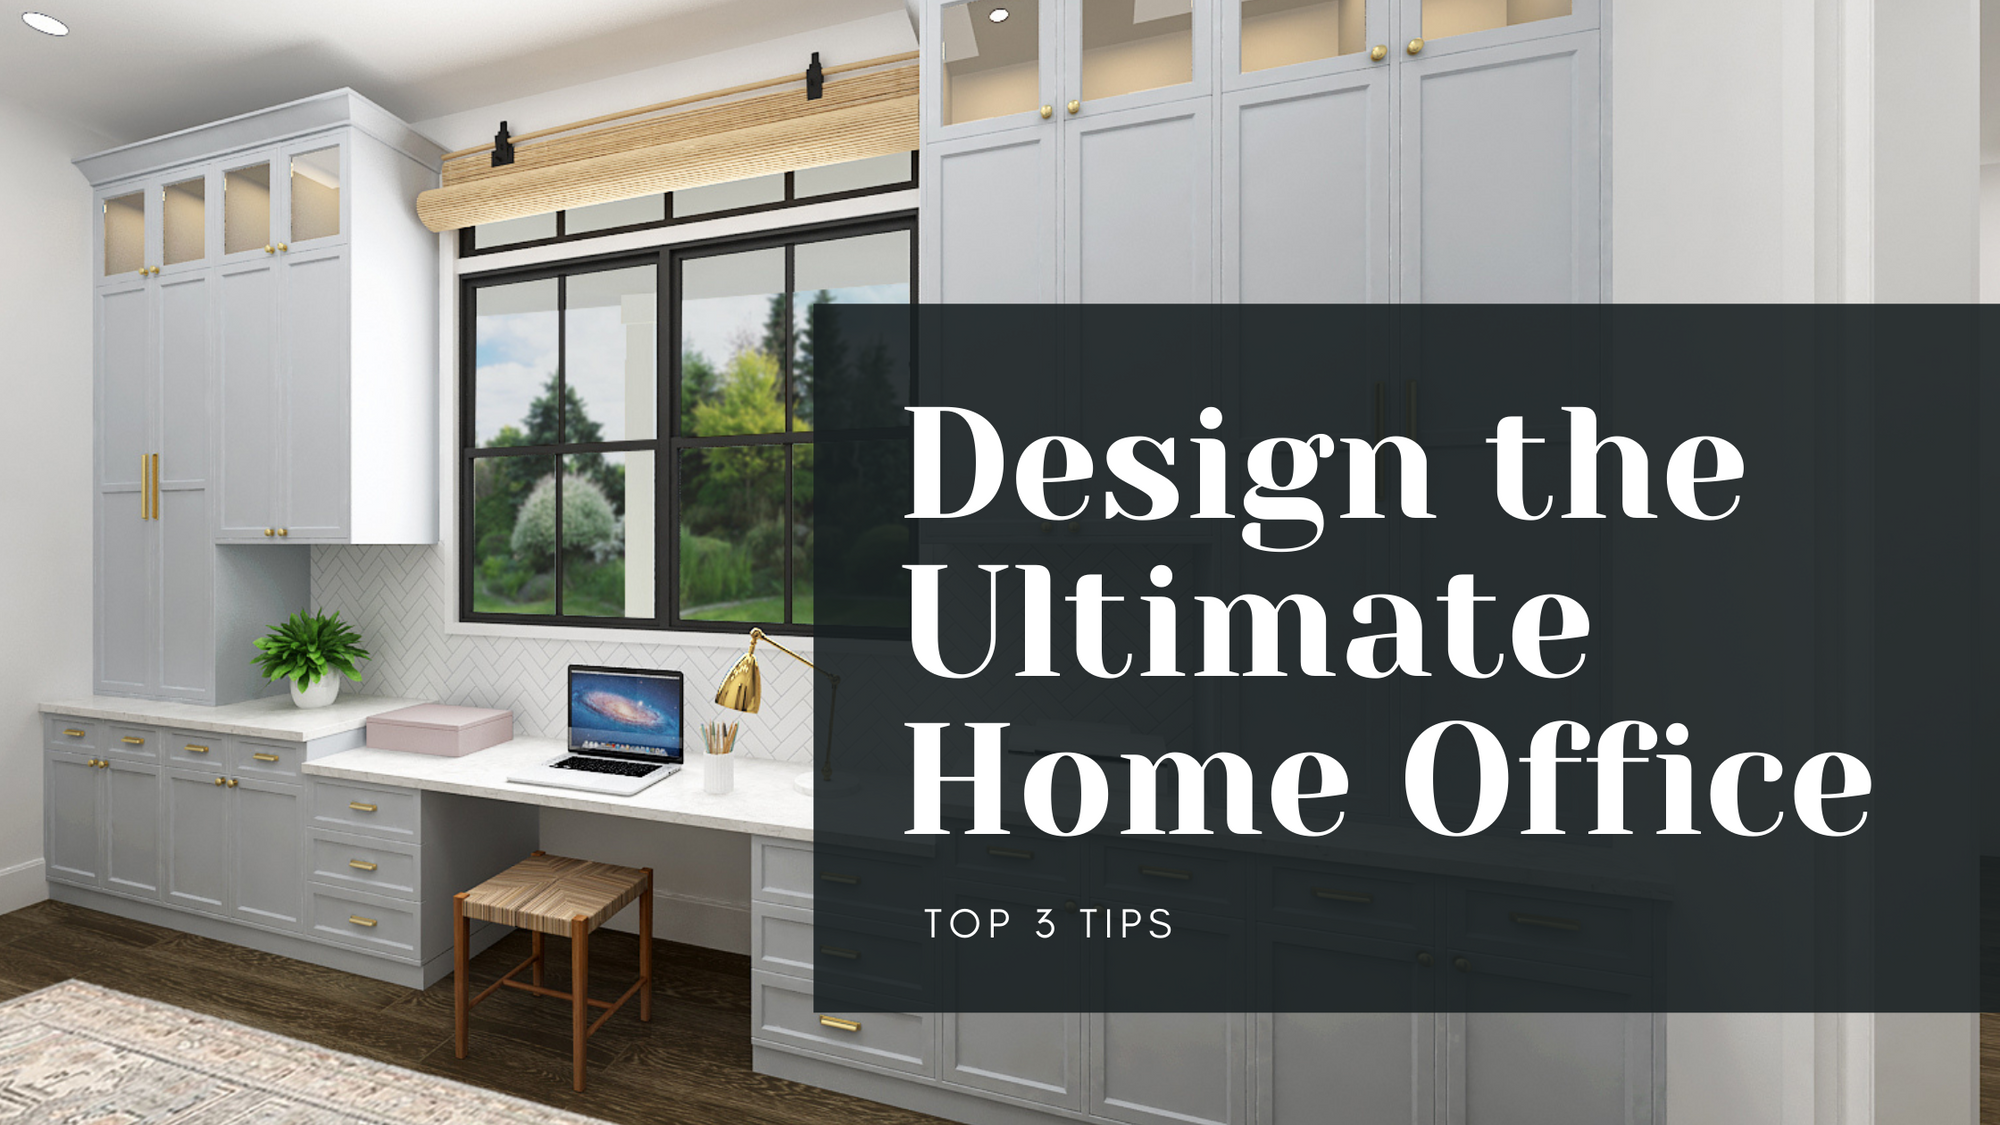 Design the Ultimate Home Office